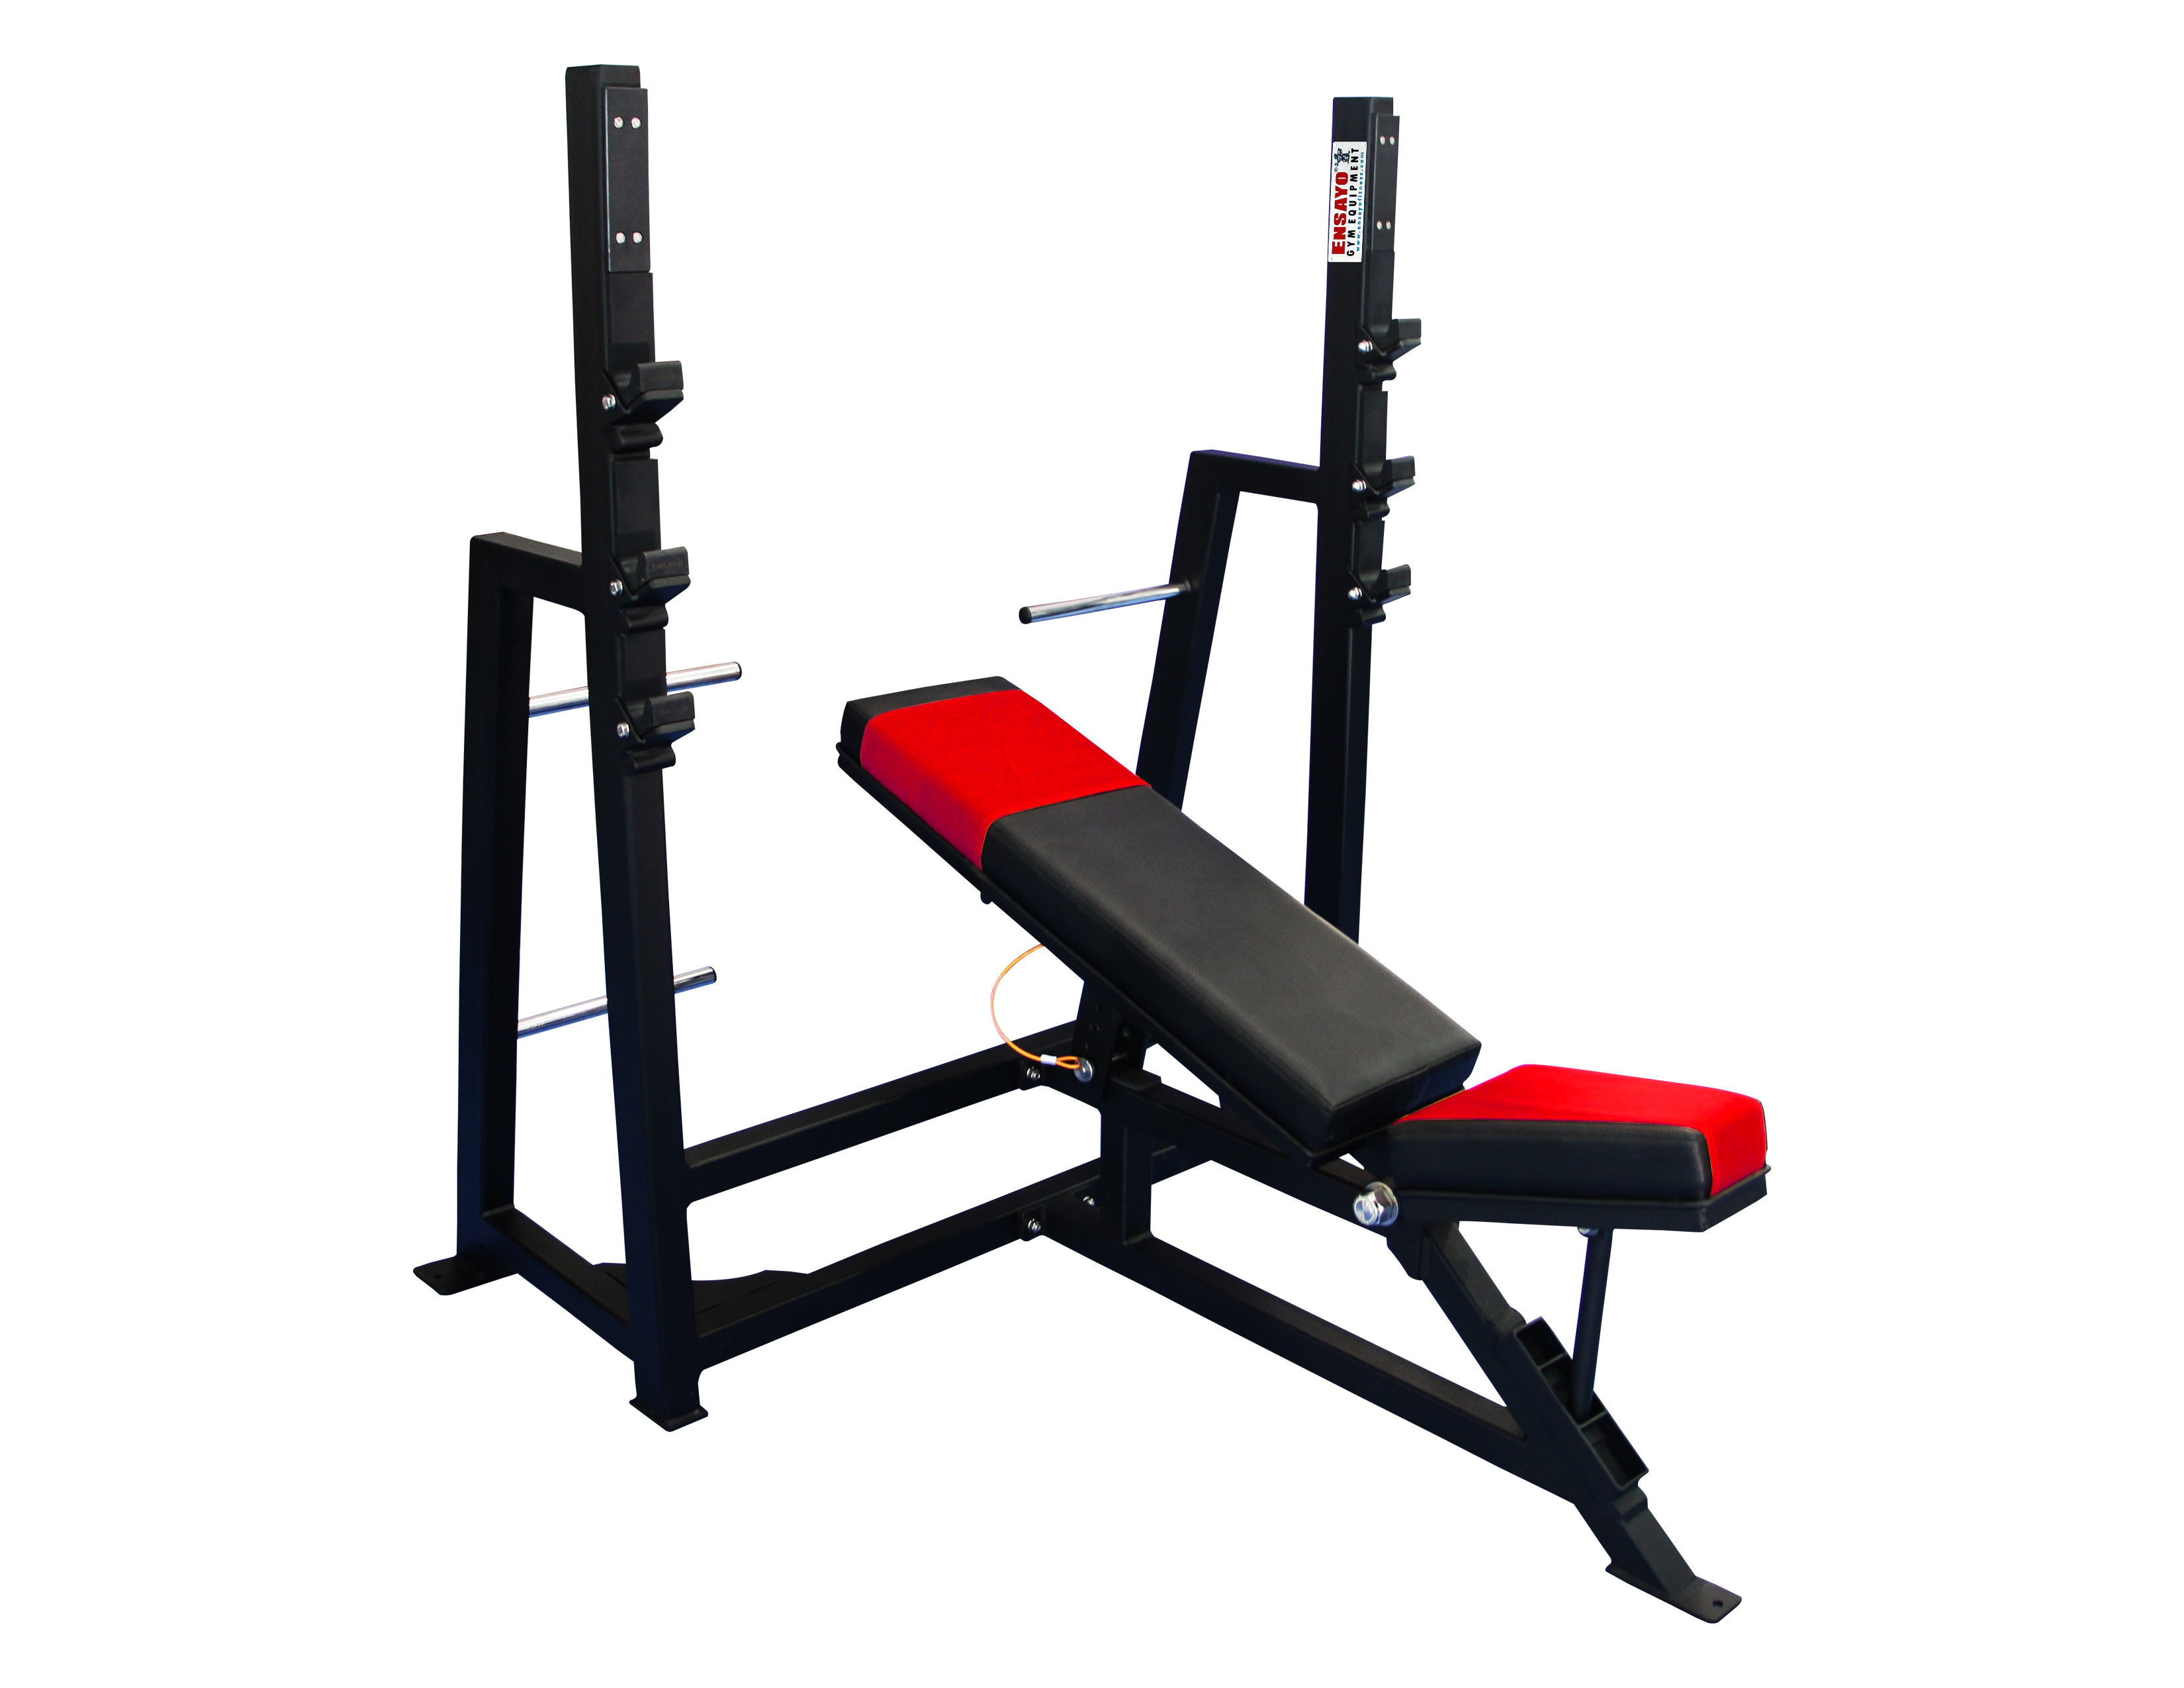 Adjustable Olympic Incline Bench Press Machine